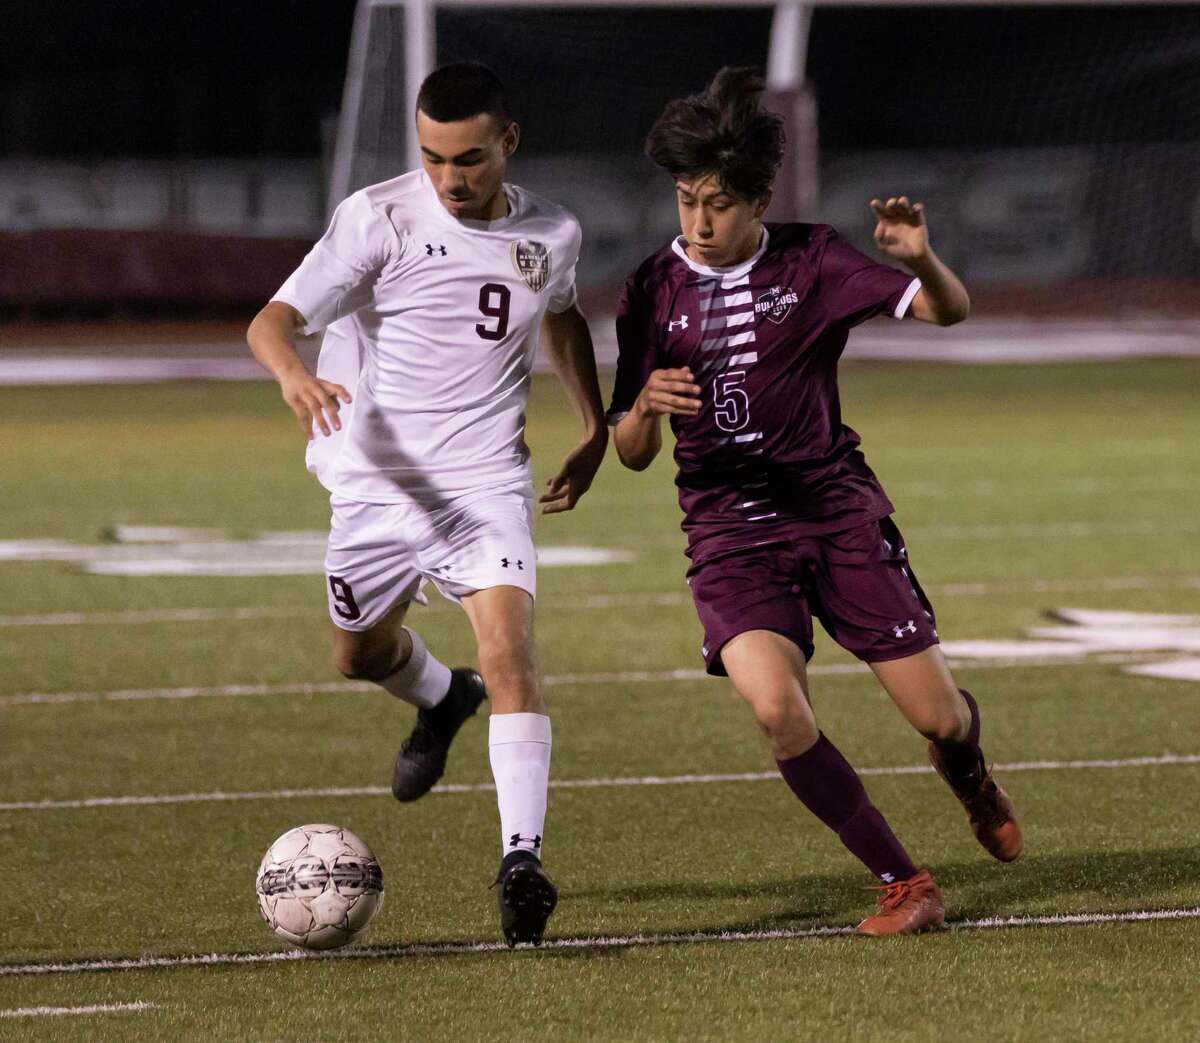 Abel Piedra of Magnolia (5) and Magnolia West defender Jose Moreno (9) fight for control of the ball during the first half in a District 19-5A boys soccer game on Tuesday, March 3, 2020.